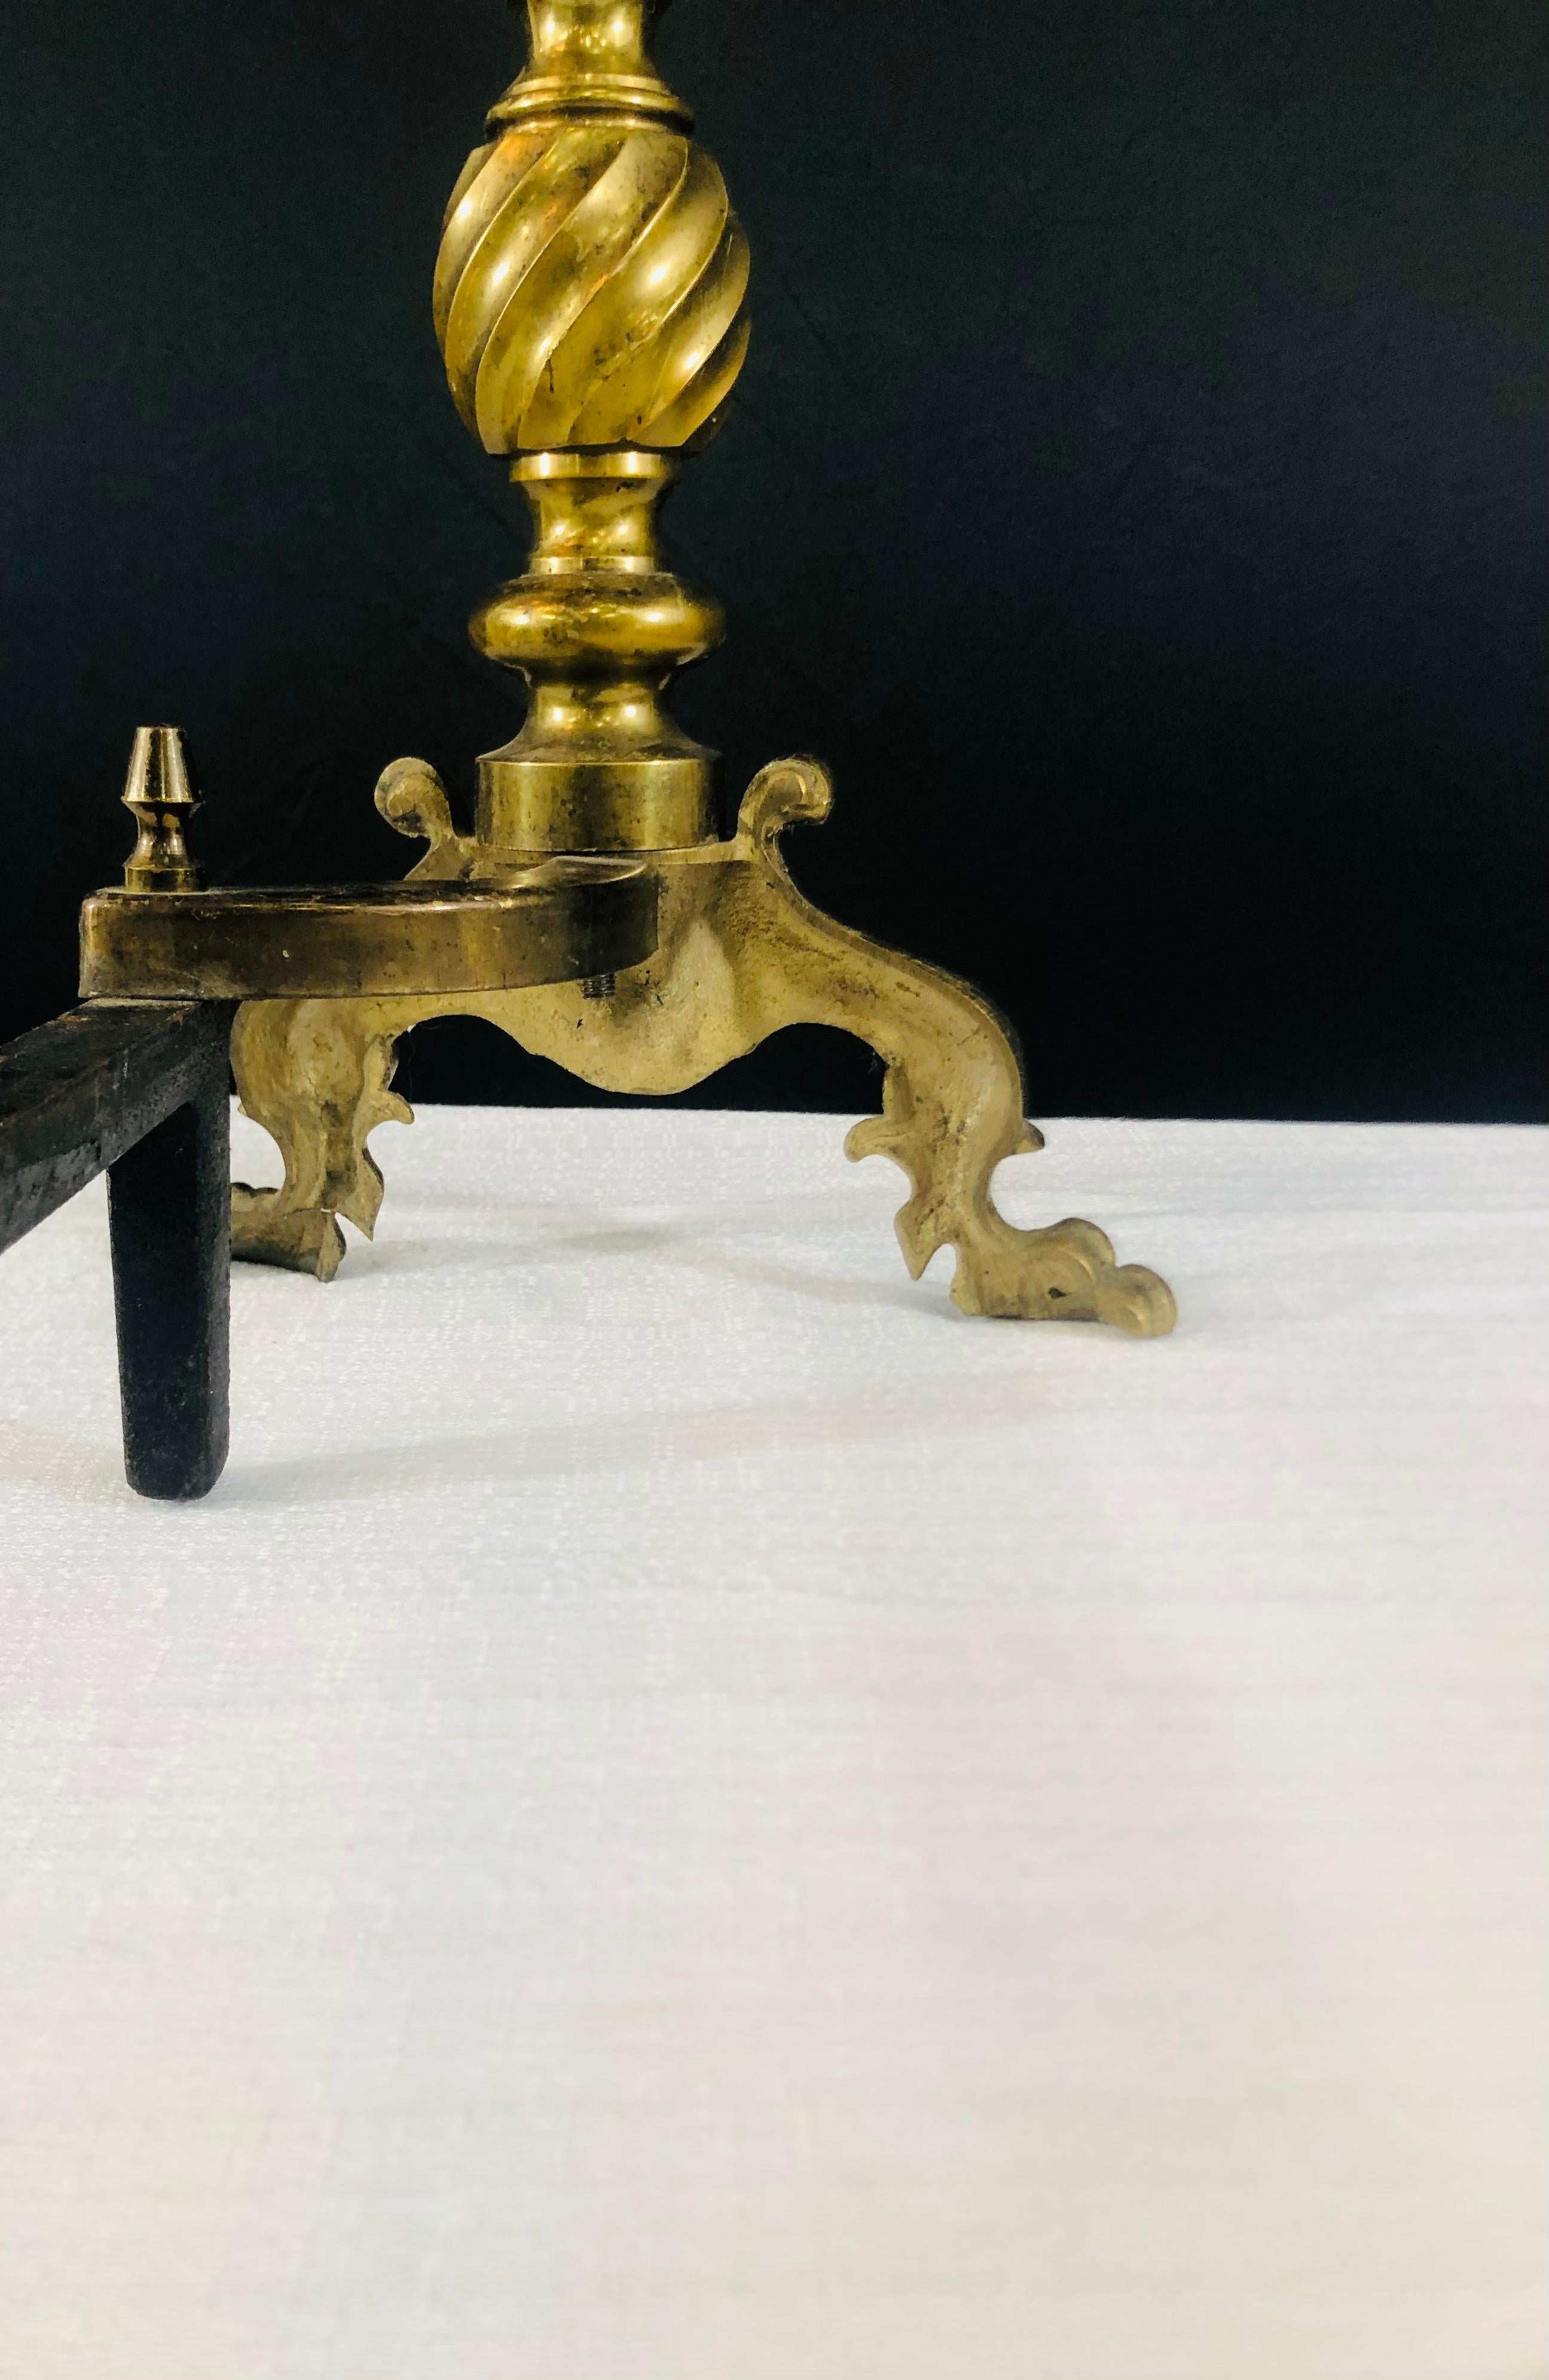 19th Century Georgian English Brass Andirons, a Pair For Sale 8